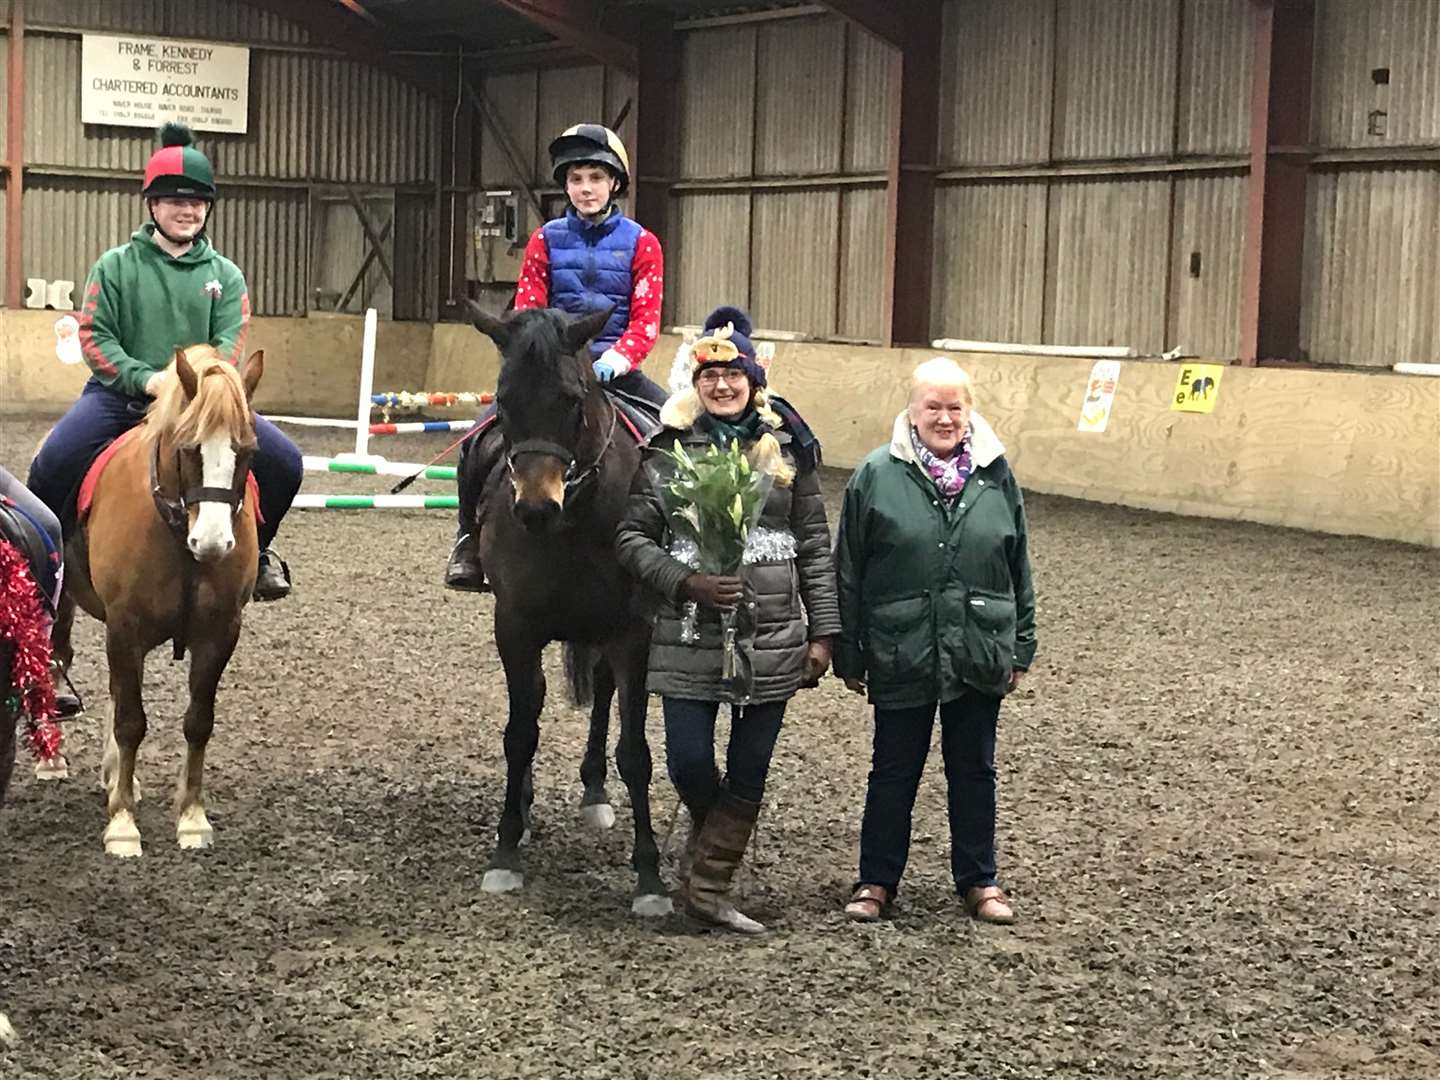 Retiring district commissioner Linda Ramsøy (second from the right), is pictured standing with honorary president Jessie Allan, along with pony club members Benjamin Rogers (left) and Liam Mackenzie.